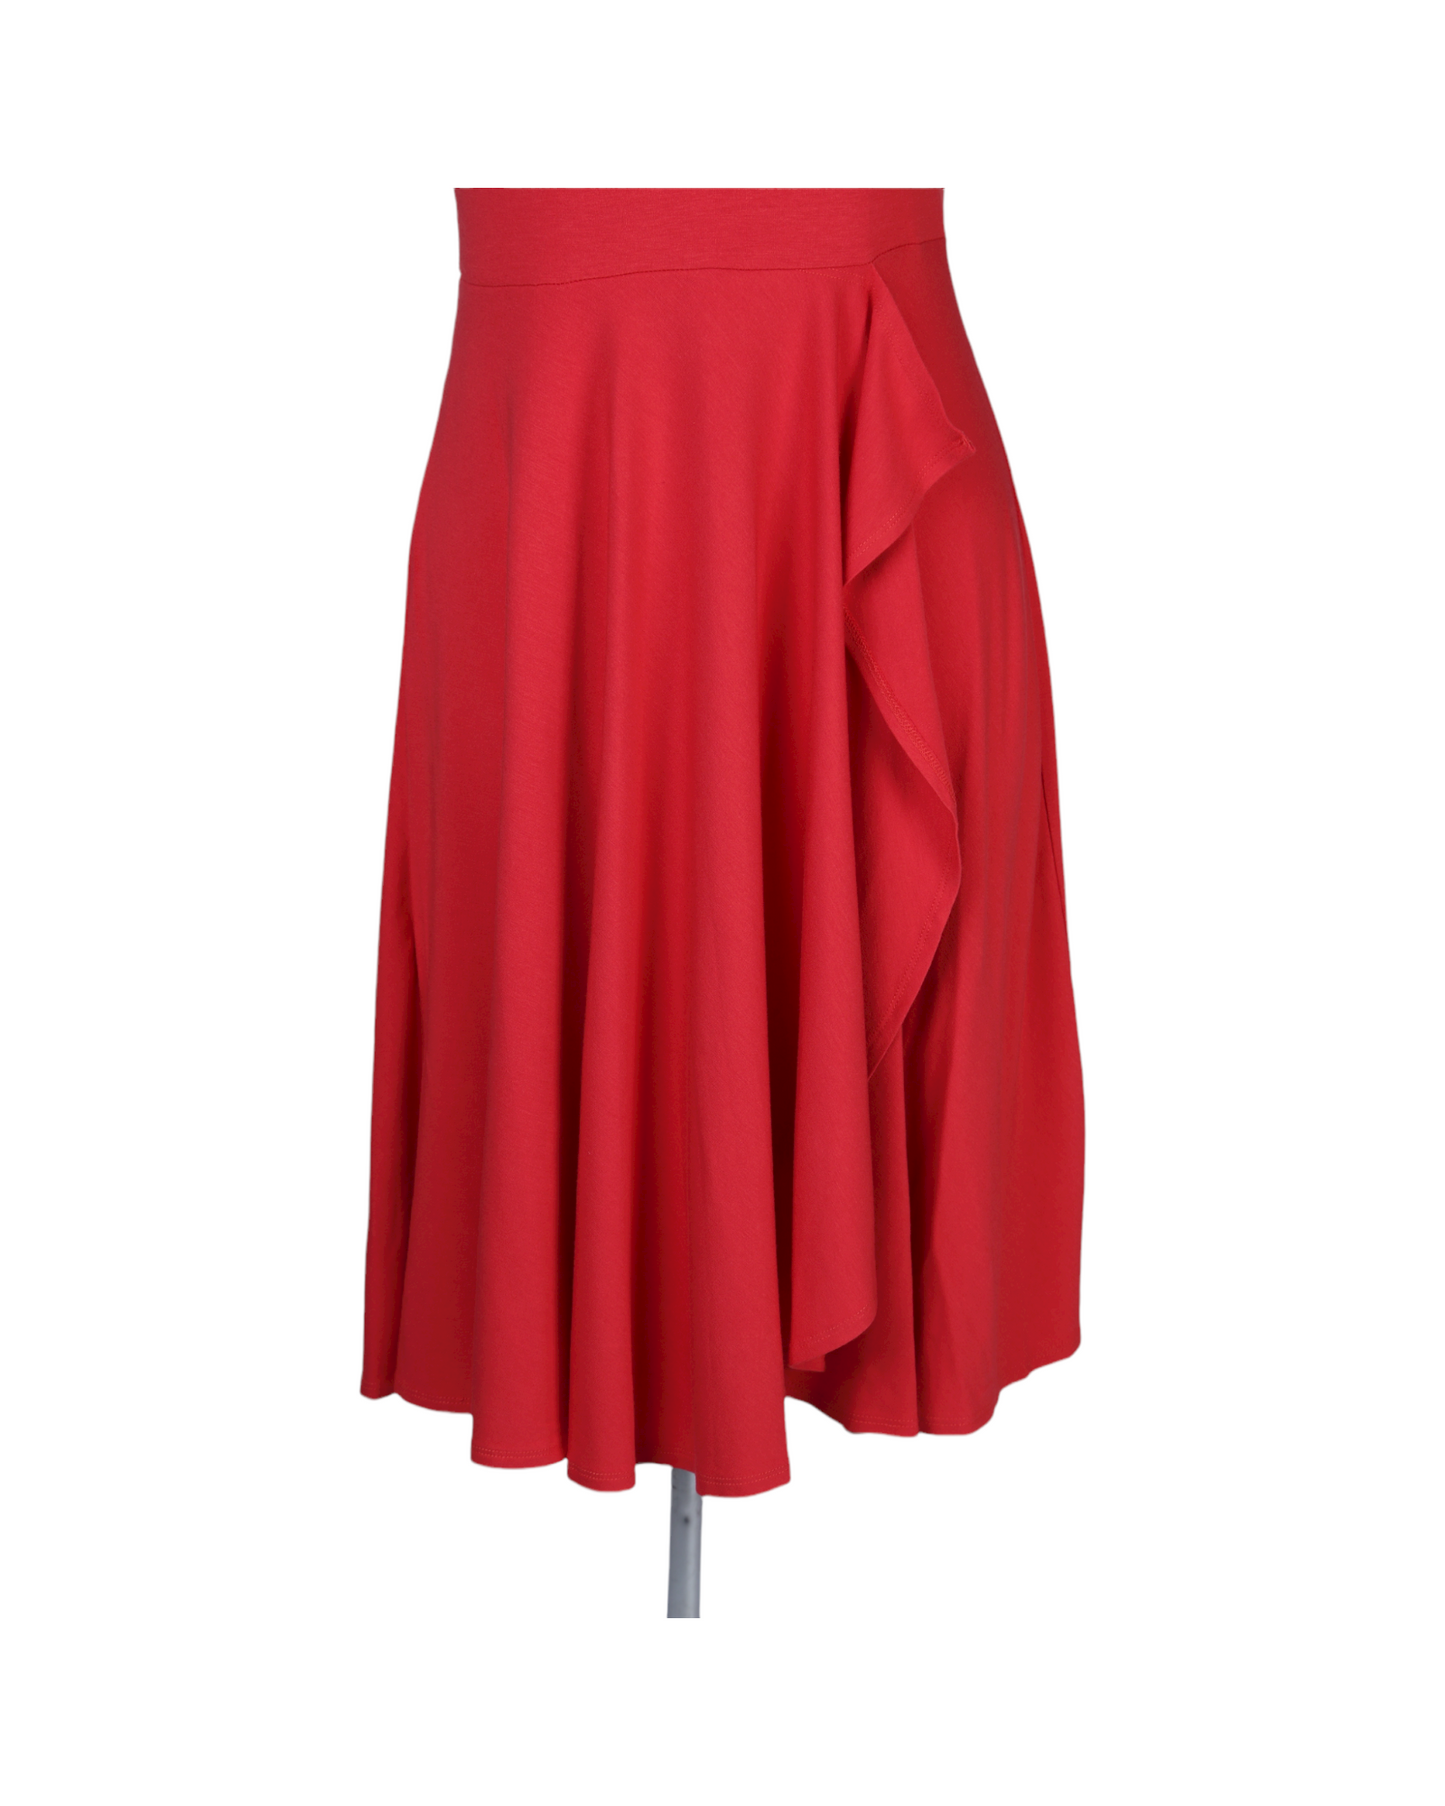 Ann Taylor Red Strapless Cocktail Dress